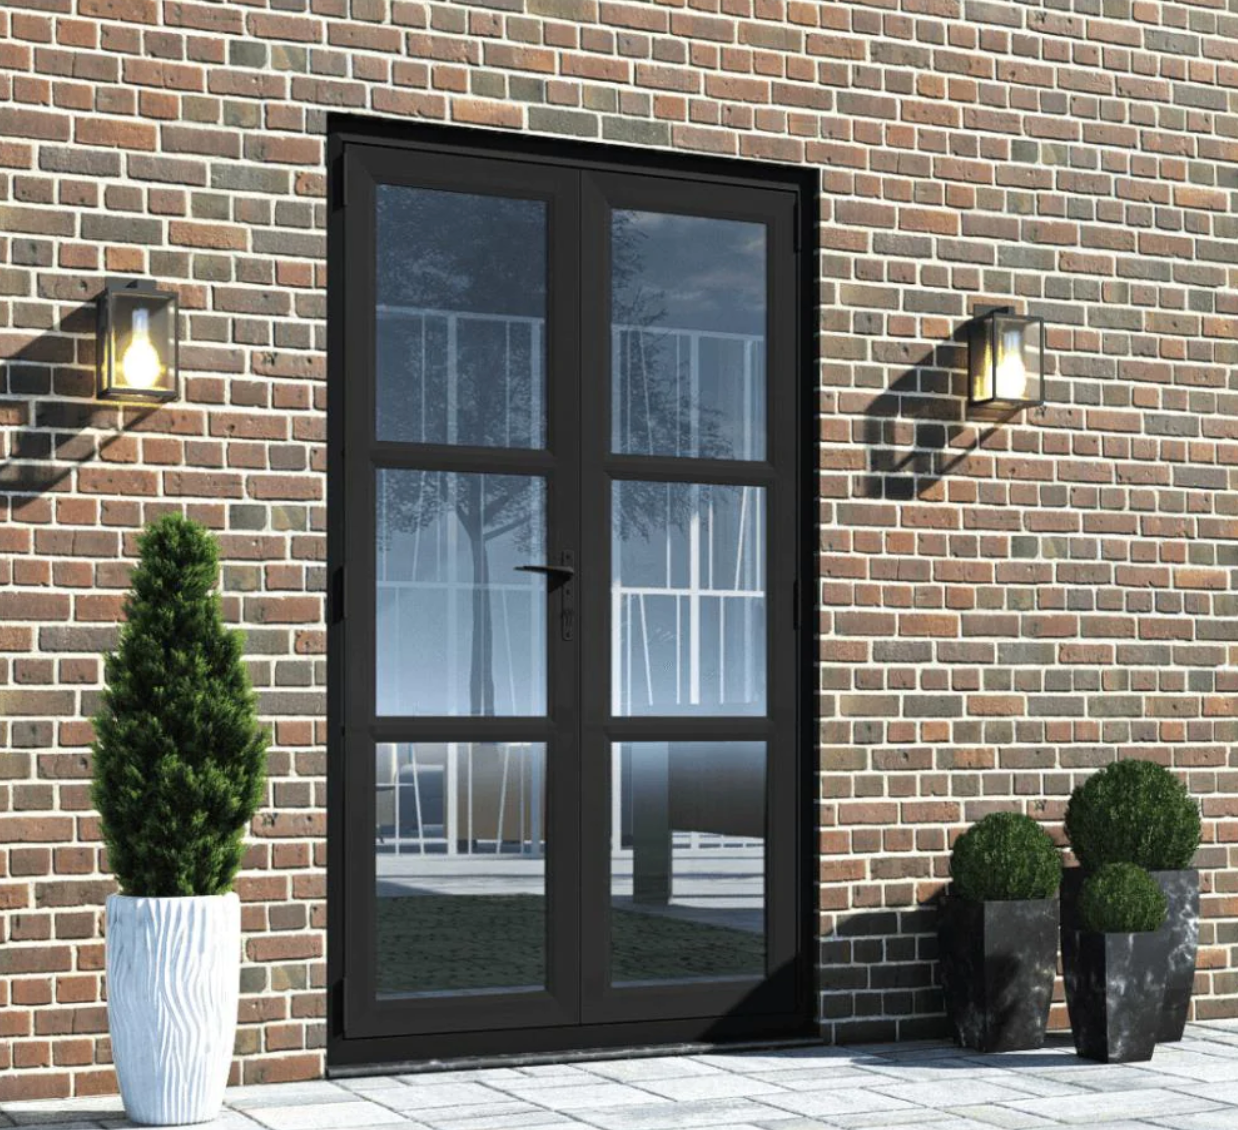 PVCu Heritage French Door: An Affordable and Durable Solution for Your External Doors